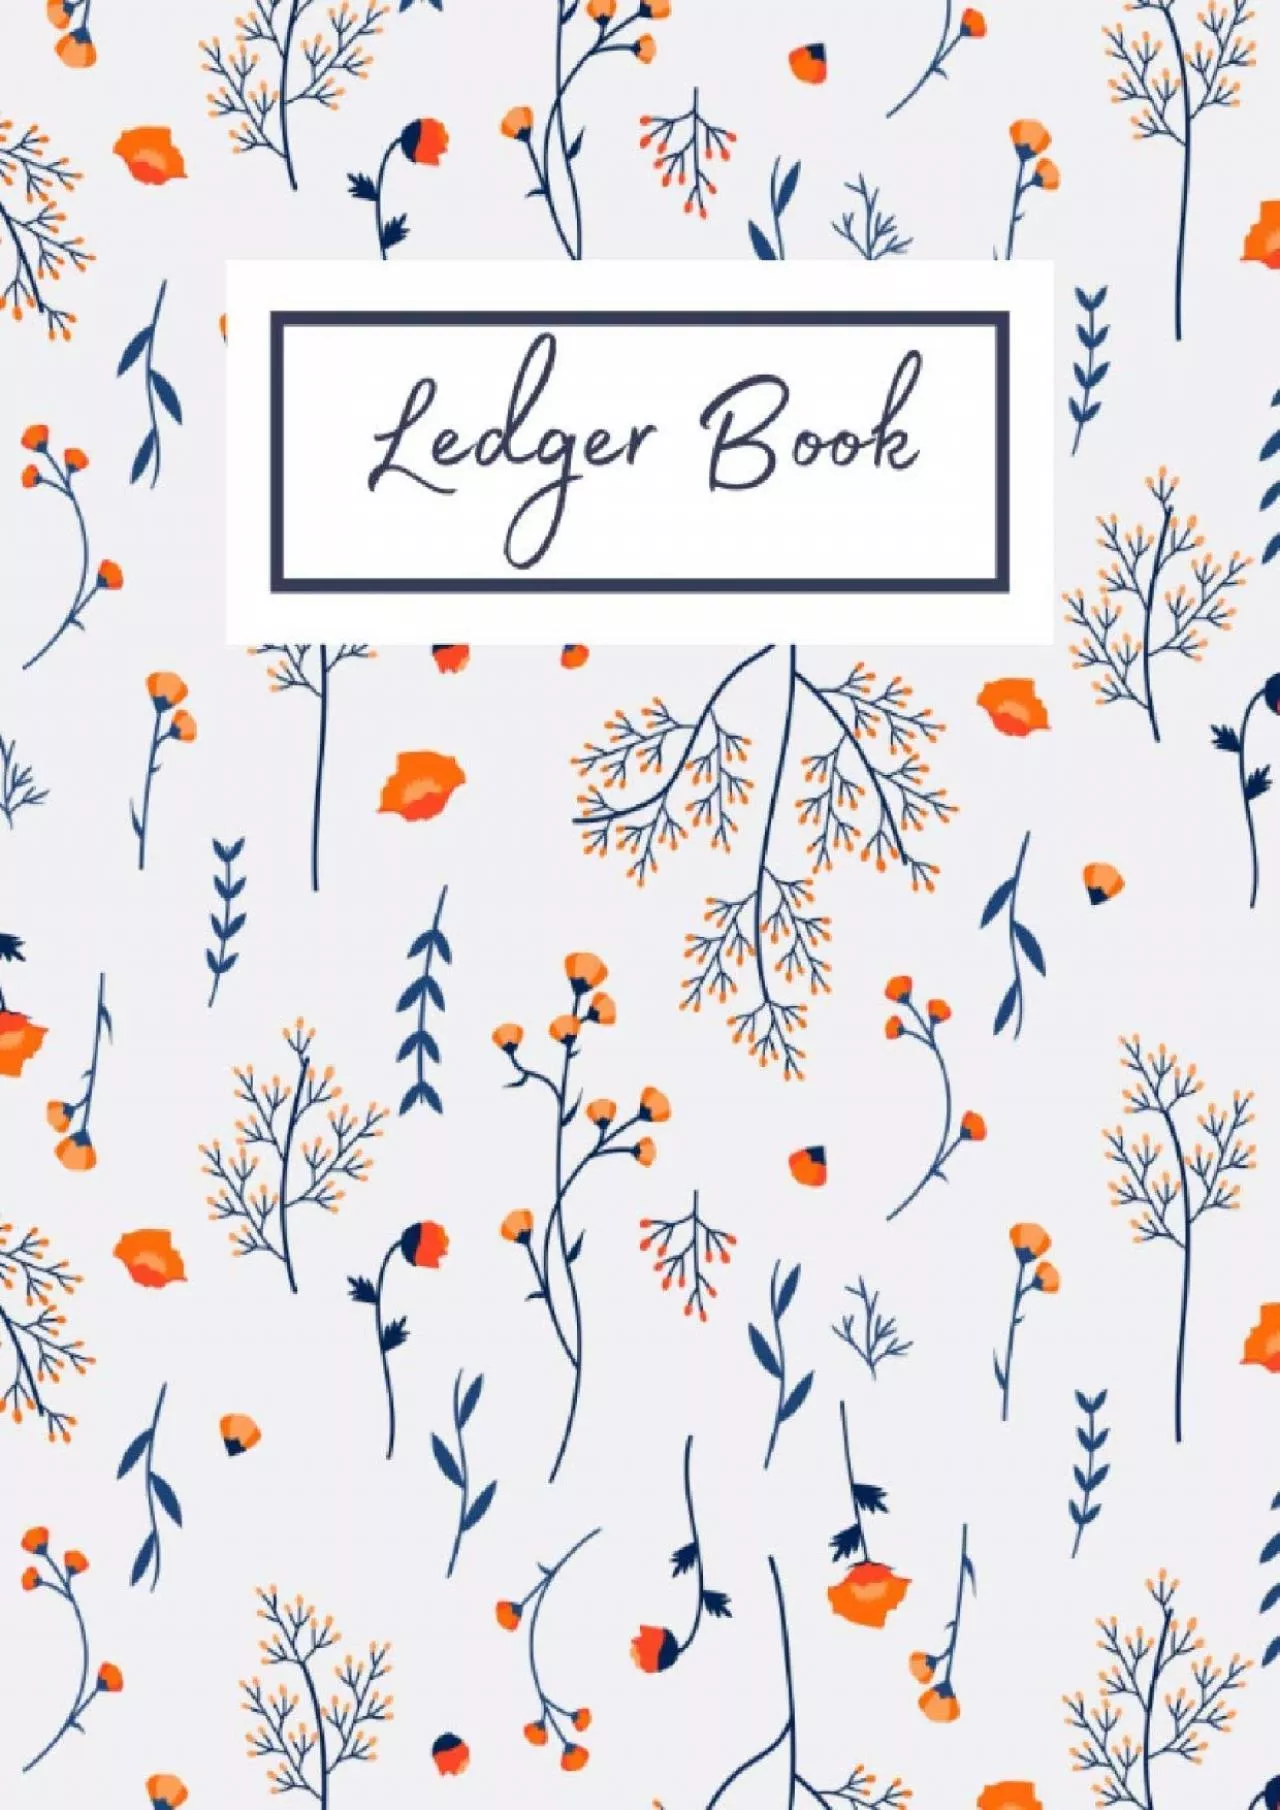 Ledger Book For Women: Accounting Ledger For Bookkeeping - Record Income and Expenses